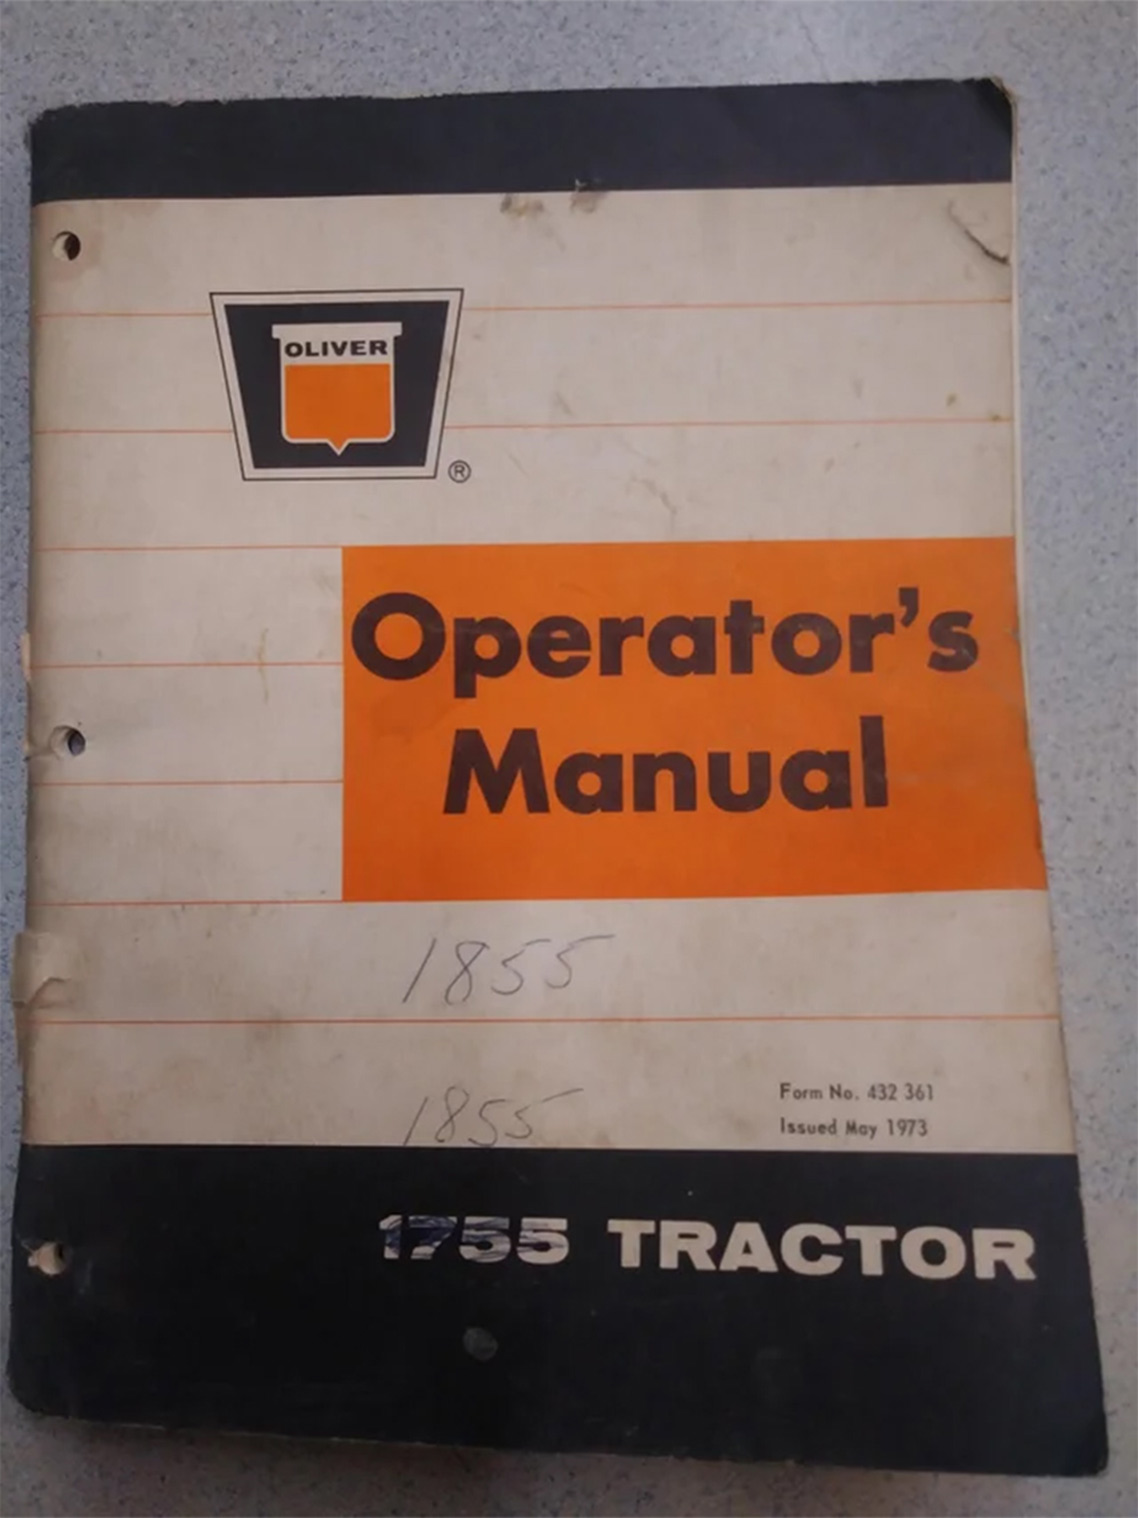 Oliver 1755-1855 Operator's Manual